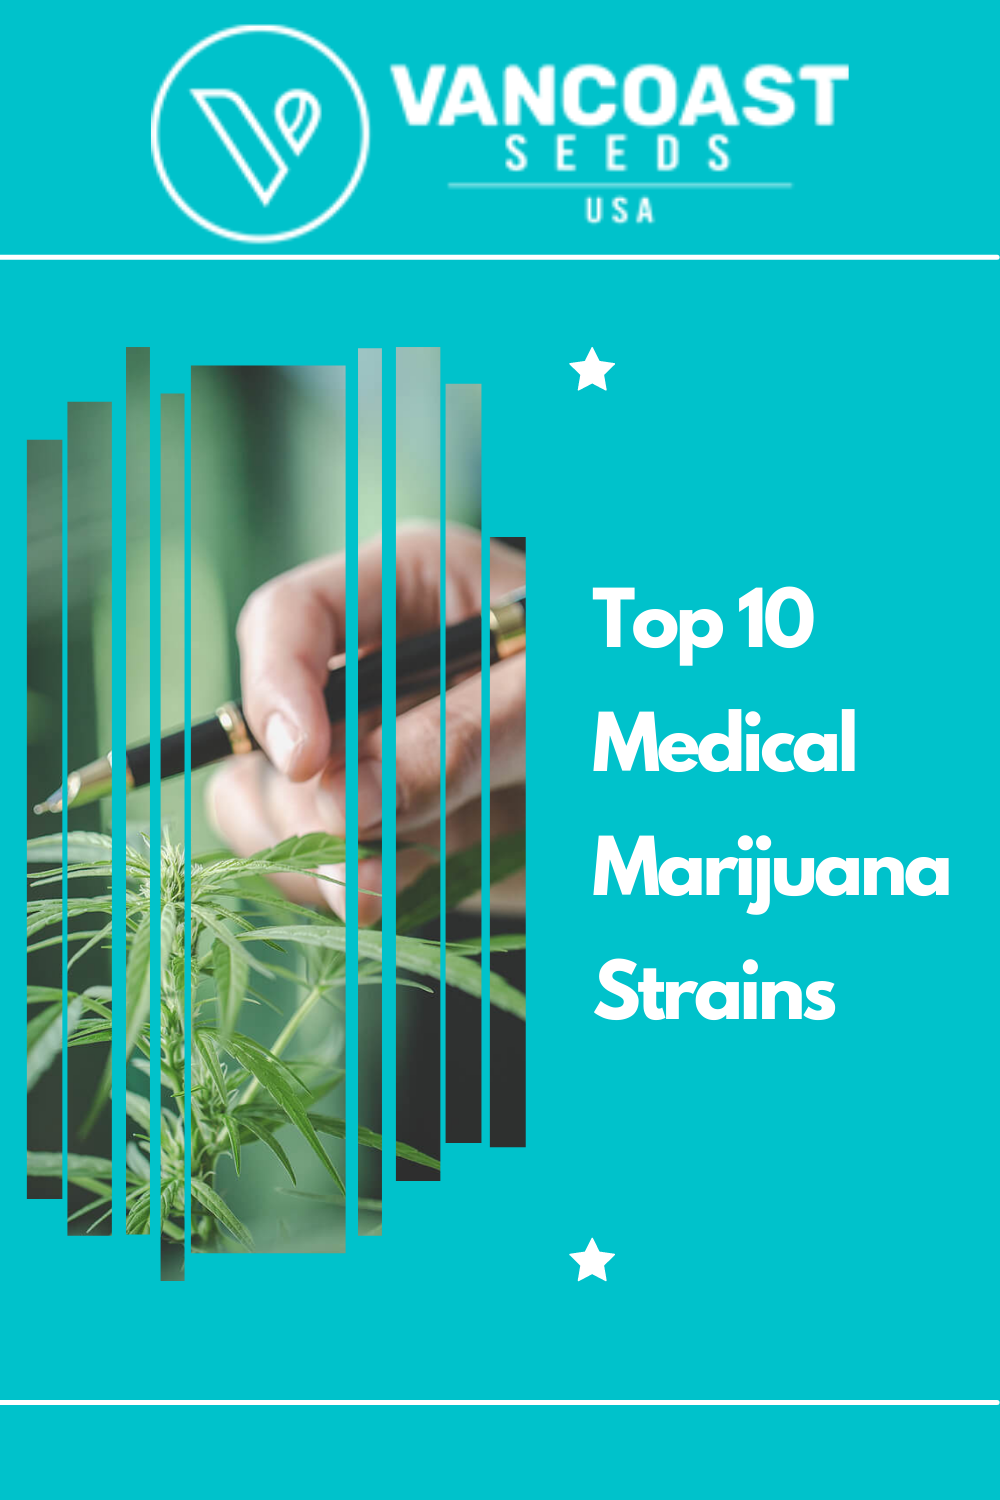 Article about Top 10 Medical Marijuana Strains